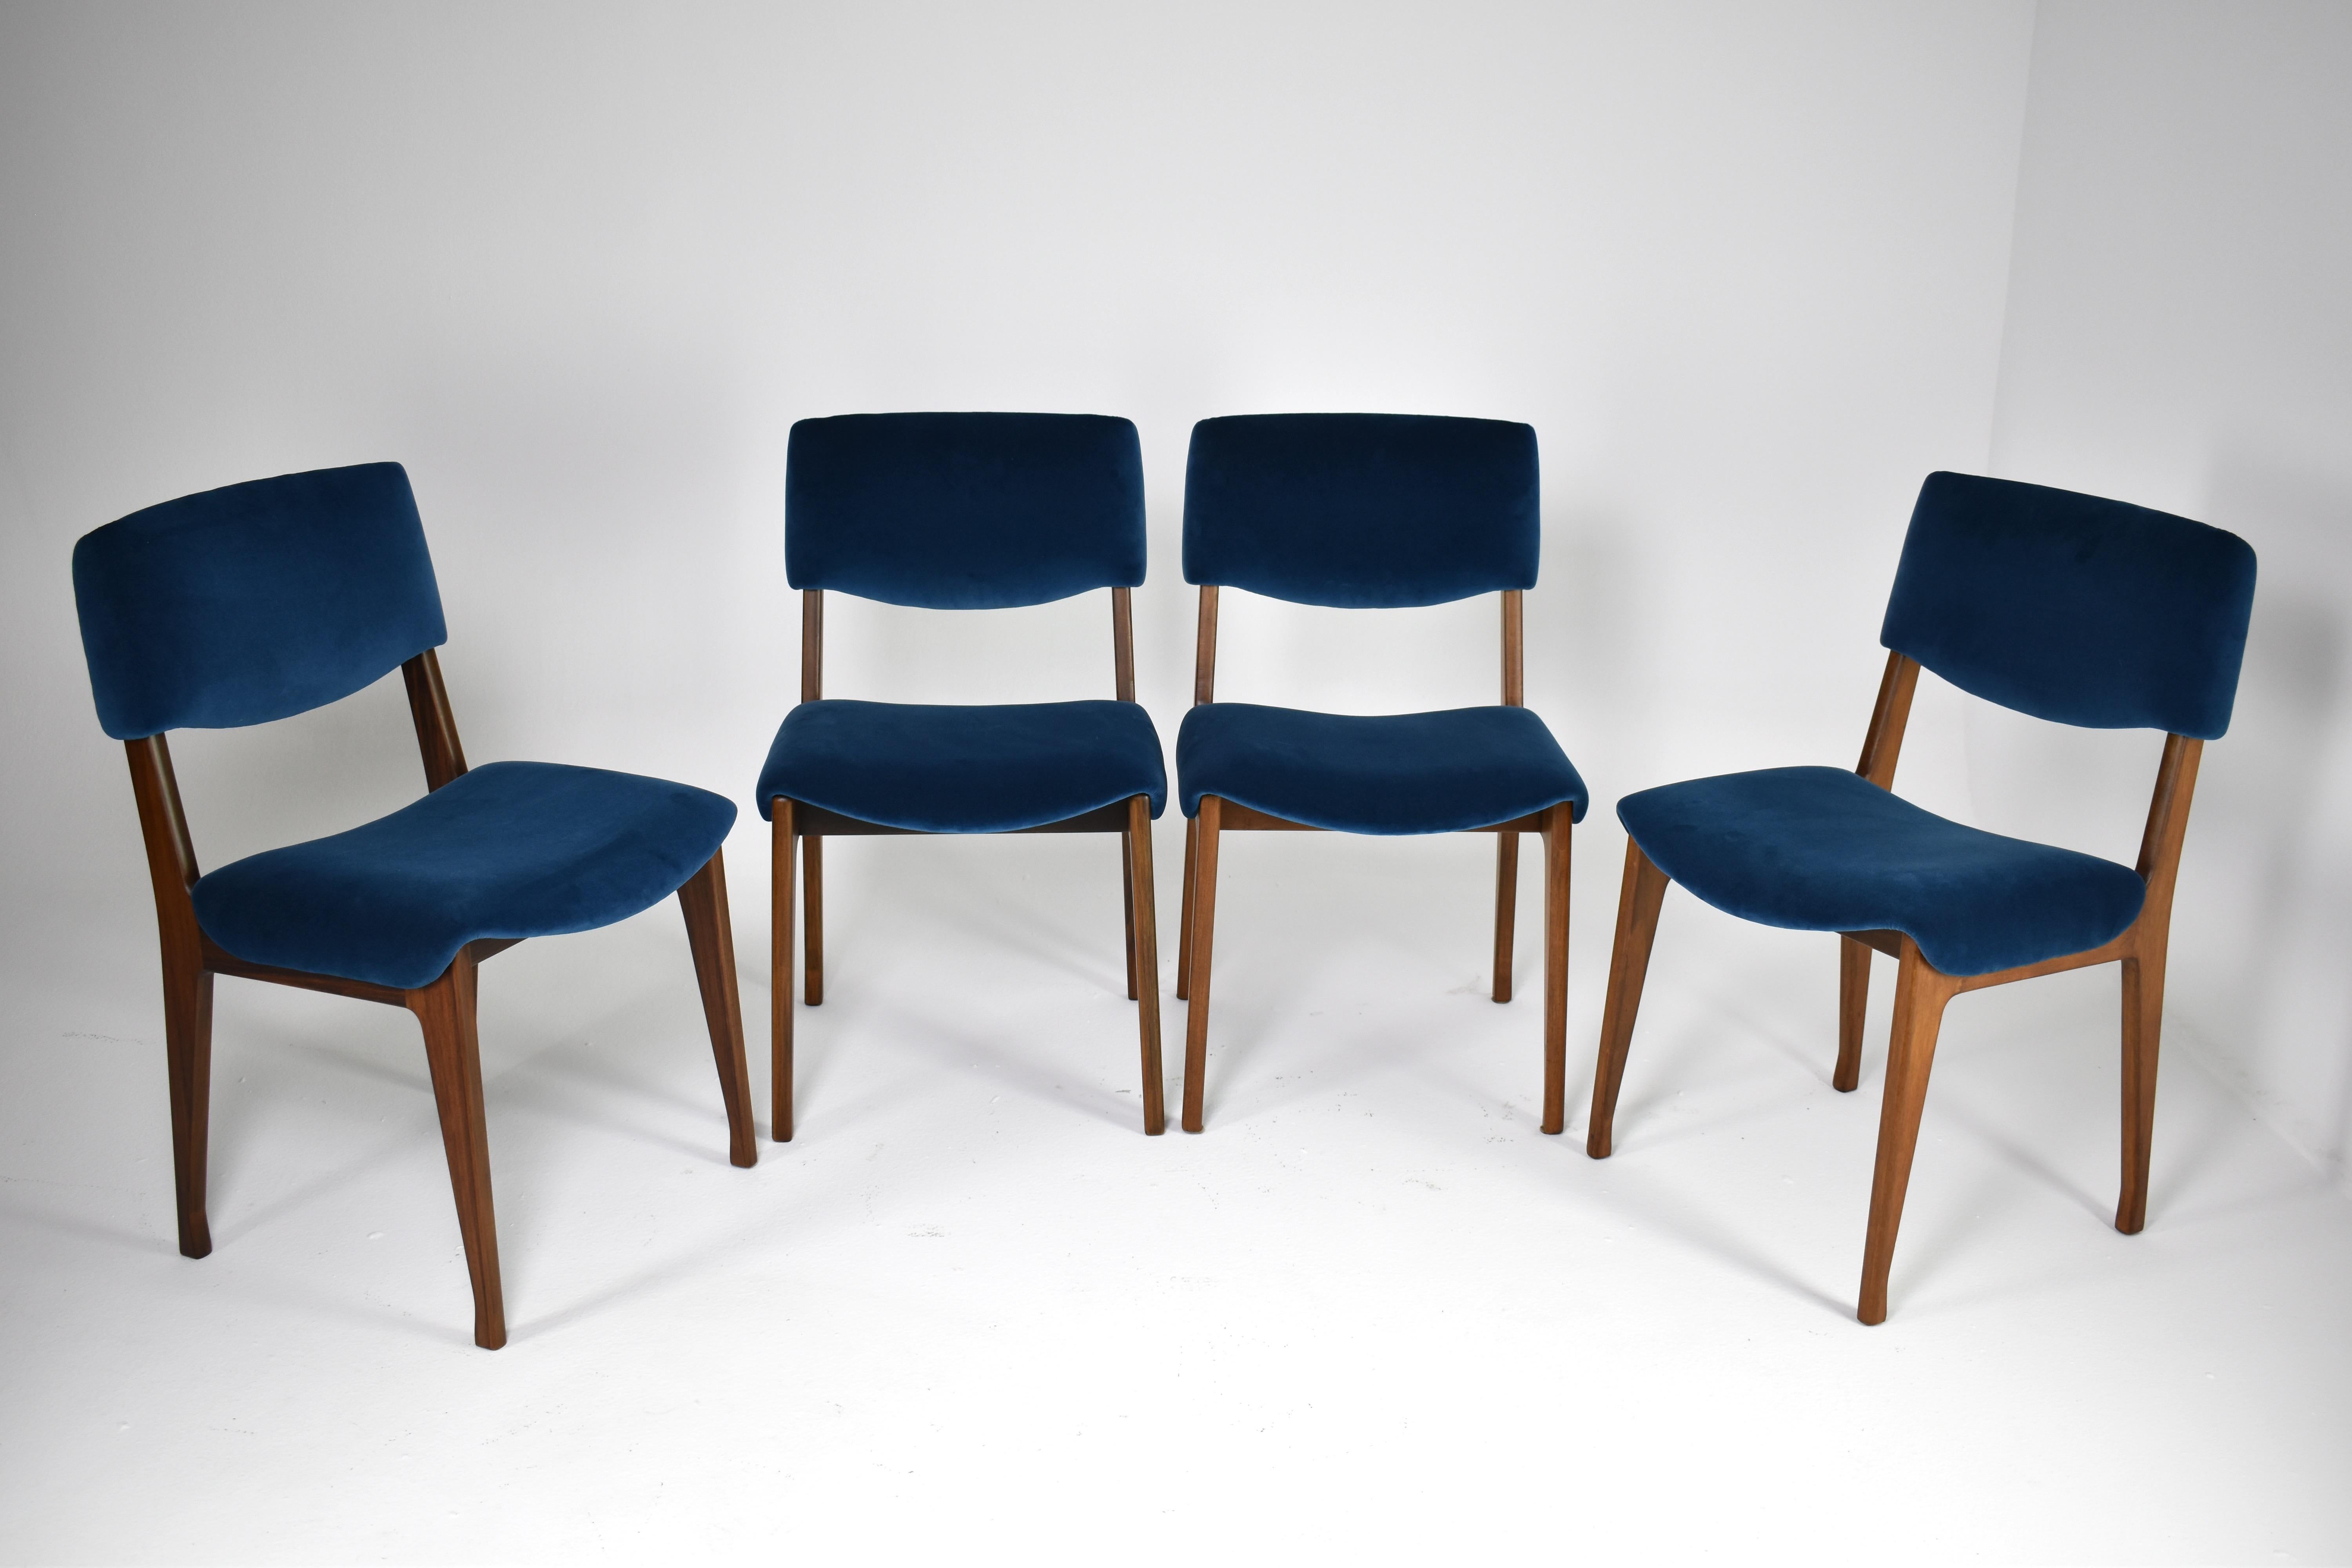 Set of four restored Italian dining chairs by Ico Parisi for MIM from the 1950s-60s. Crafted from wood and reupholstered in dark blue velvet. These beautiful collectable pieces are highlighted by their curved seat and backrest. Ico Parisi was an